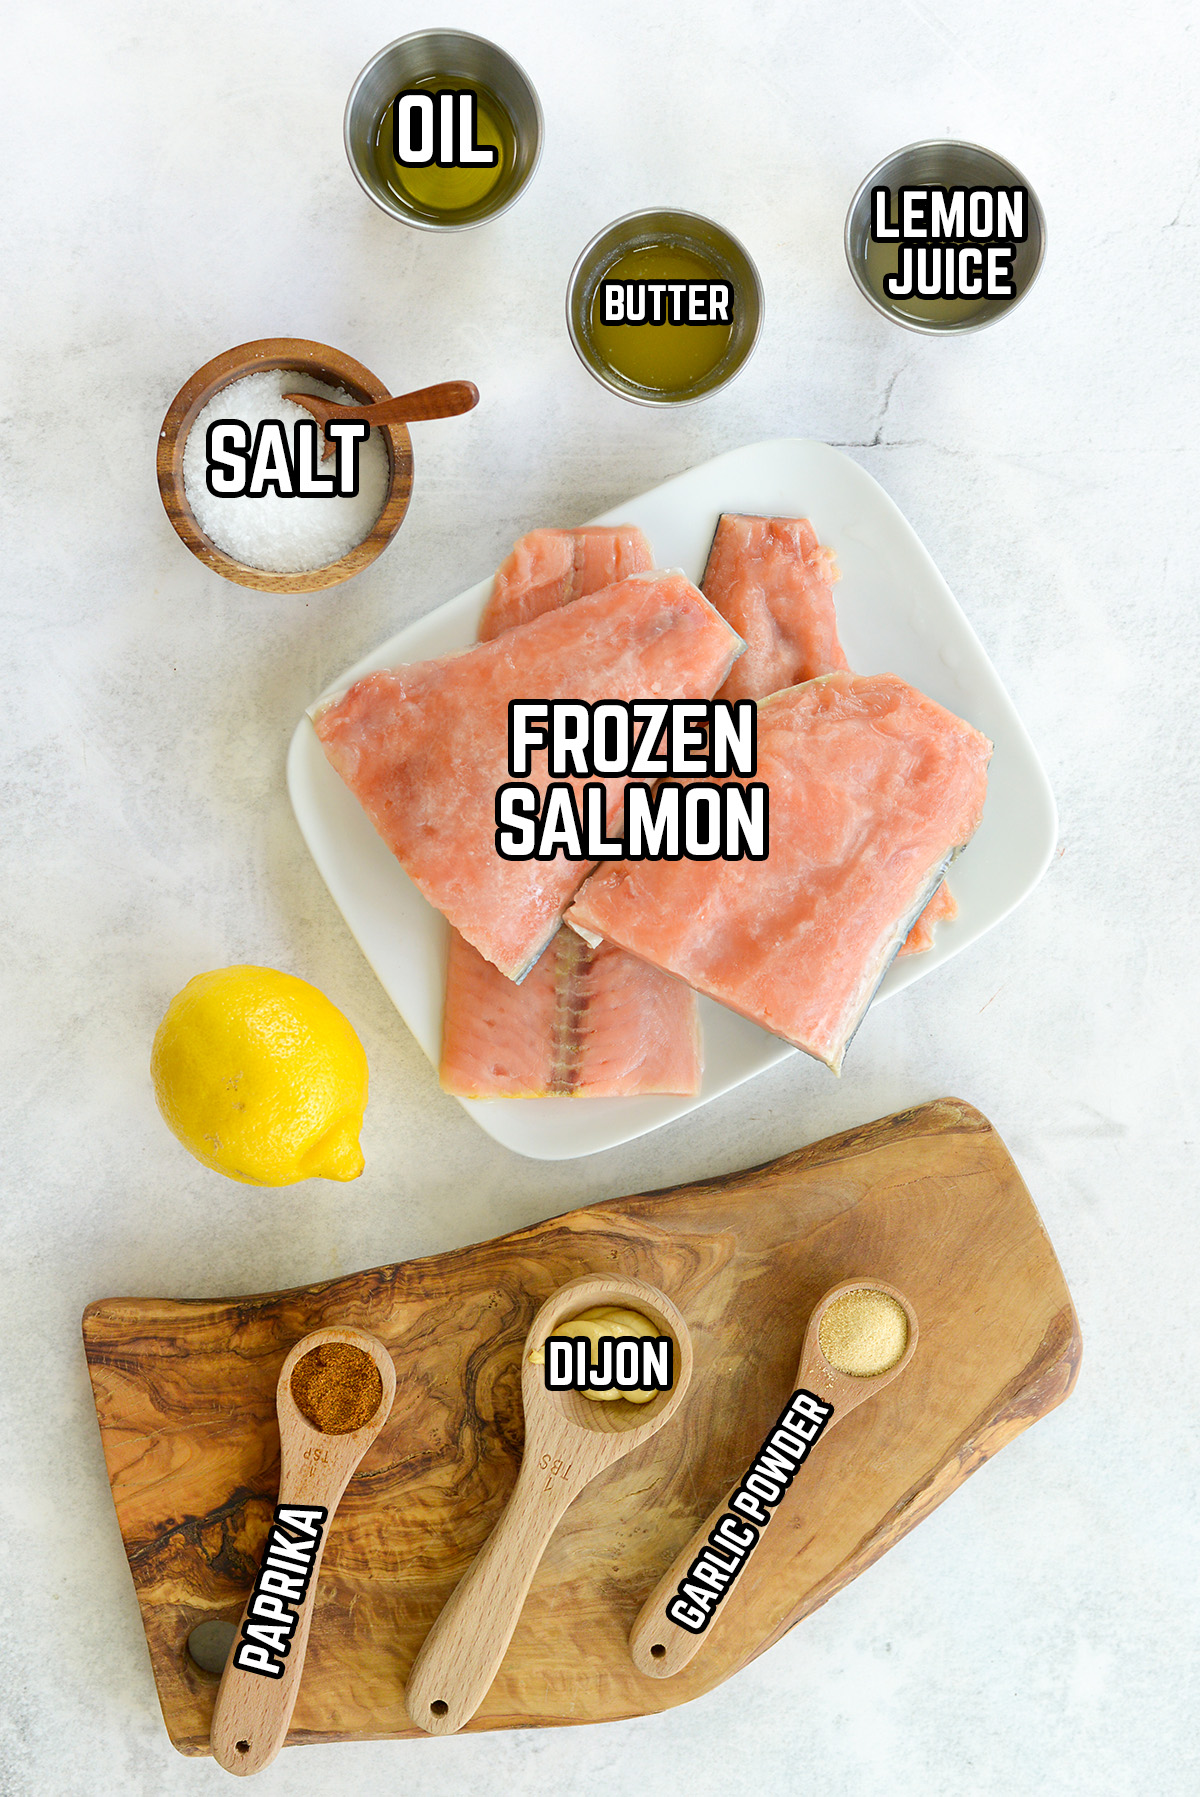 Air fryer salmon fillet ingredients spread out on a countertop.